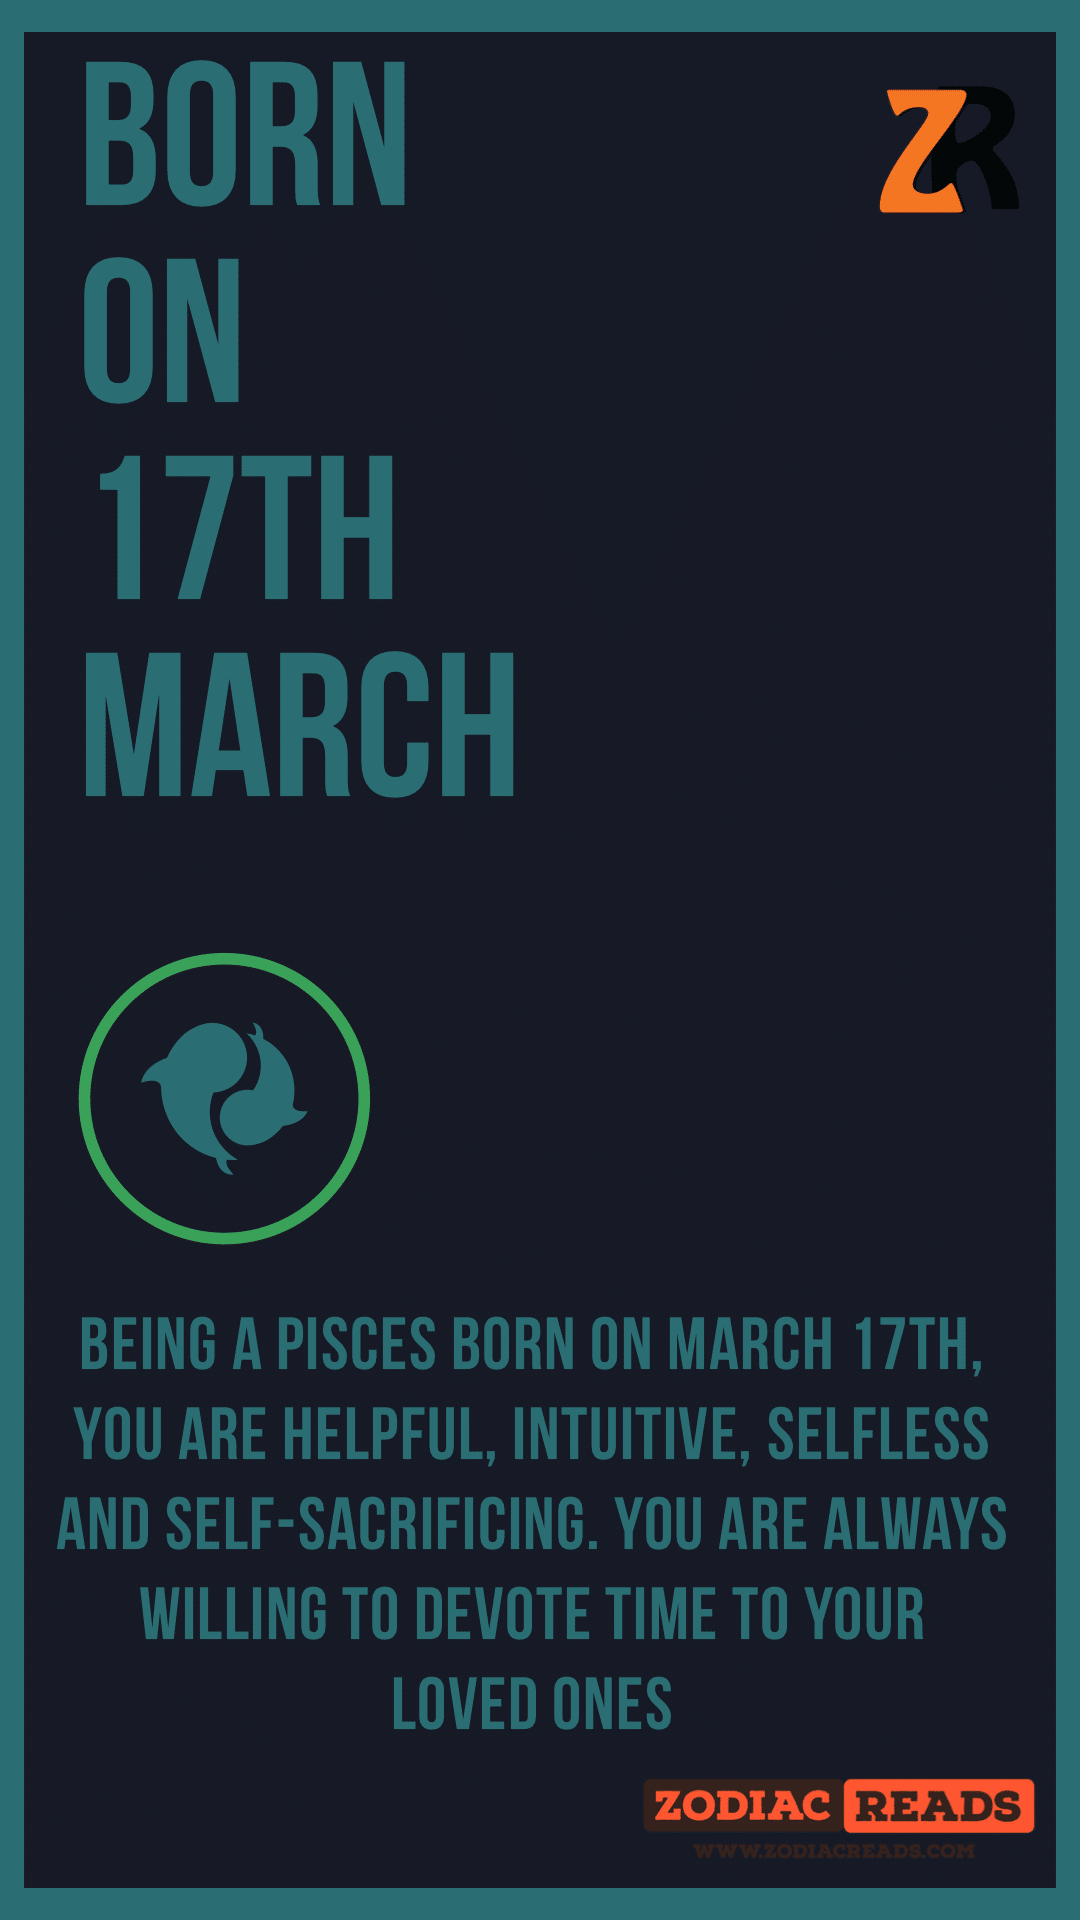 Birthday Traits of Those Born in March - ZodiacReads